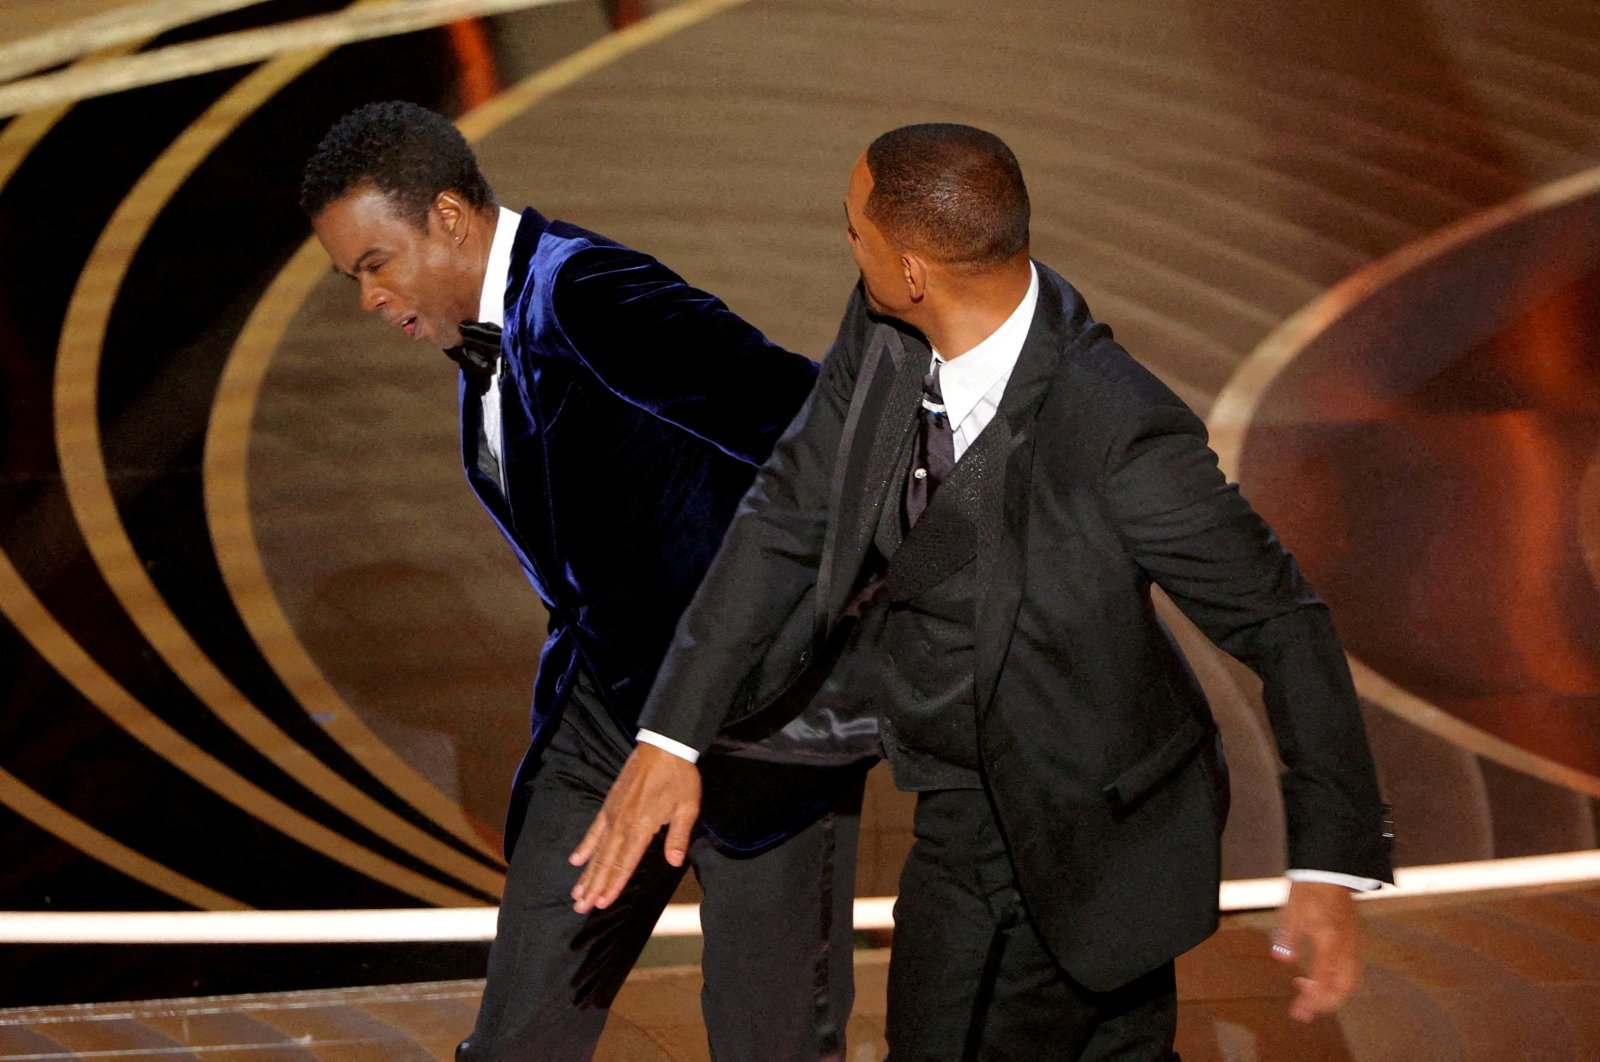 Will Smith (R) slaps Chris Rock as Rock spoke on stage during the 94th Academy Awards in Hollywood, Los Angeles, California, U.S., March 27, 2022. (Reuters File Photo)